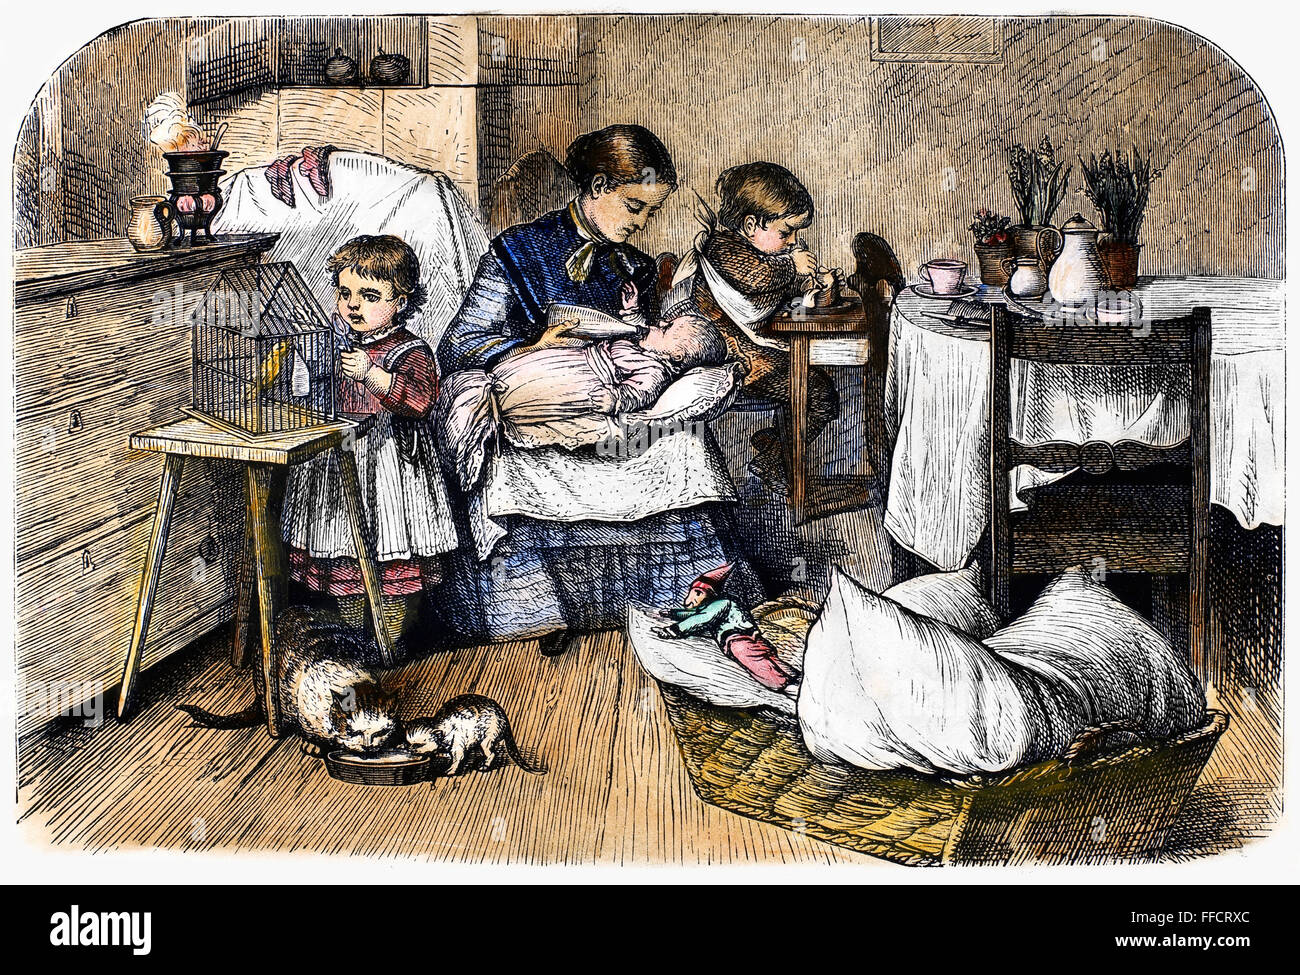 MOTHER AND CHILDREN, 1873. /nWood engraving, American, 1873. Stock Photo